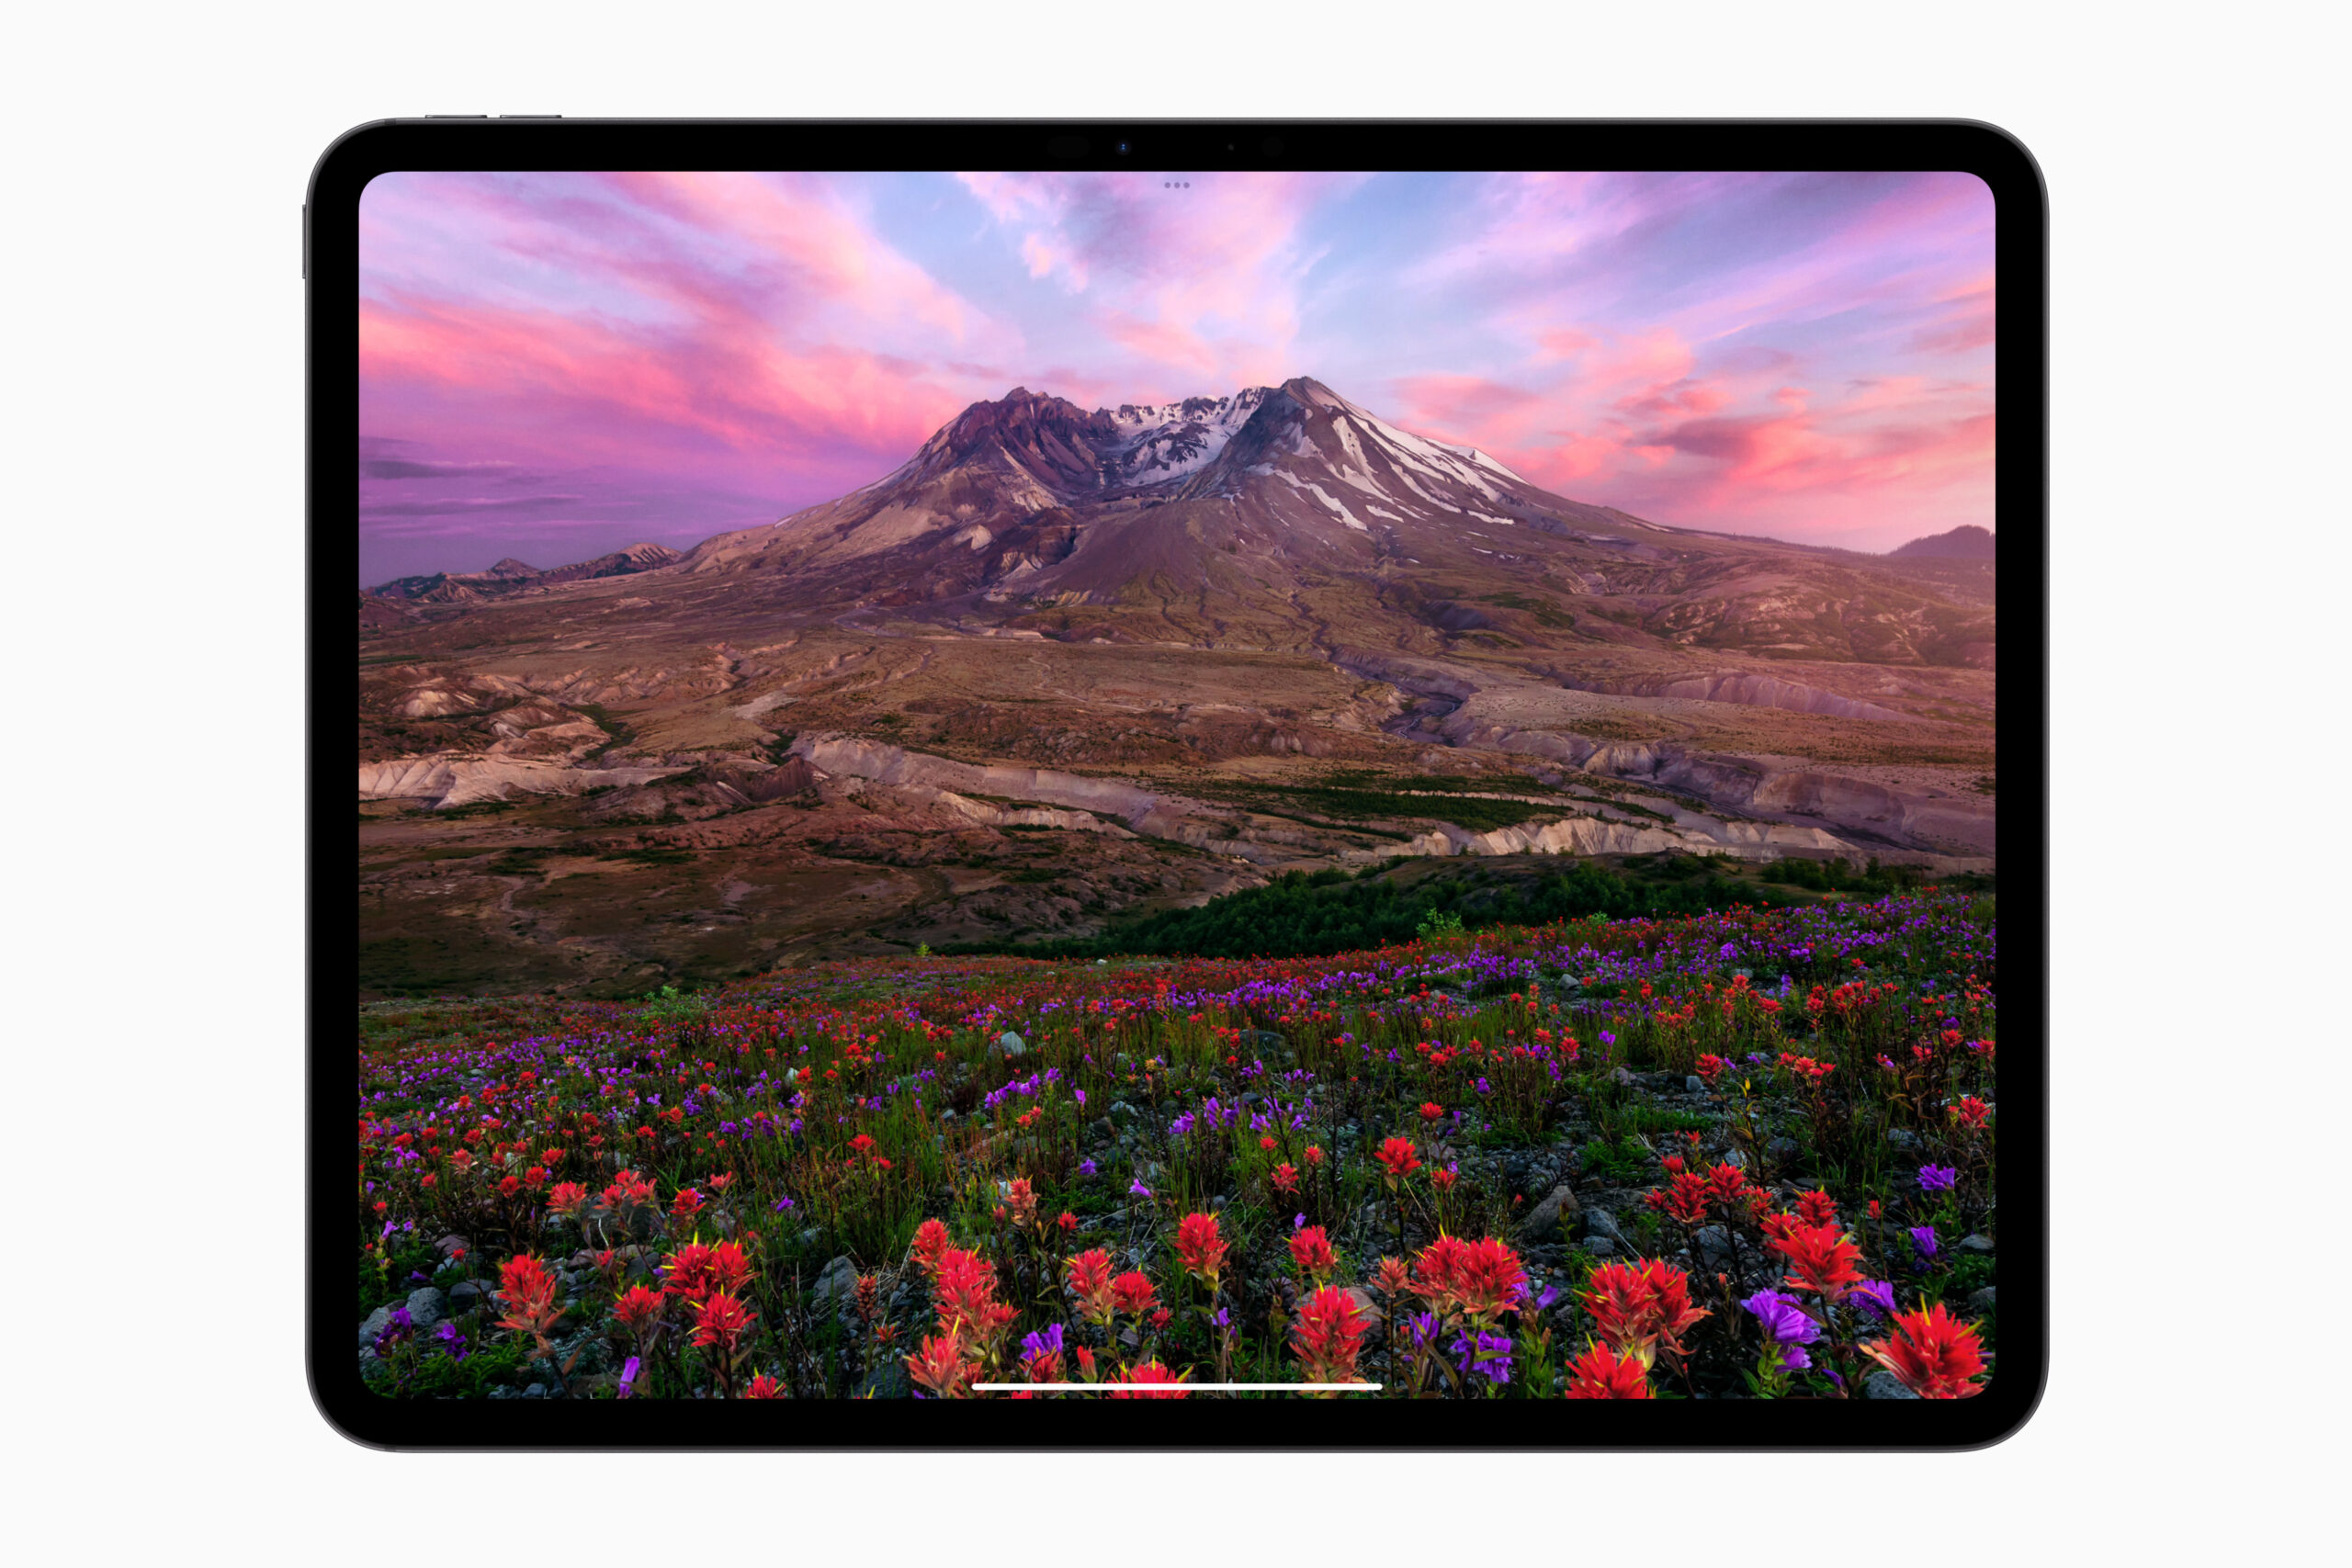 The new Ultra Retina XDR display offers unprecedented amounts of contrast and color. 